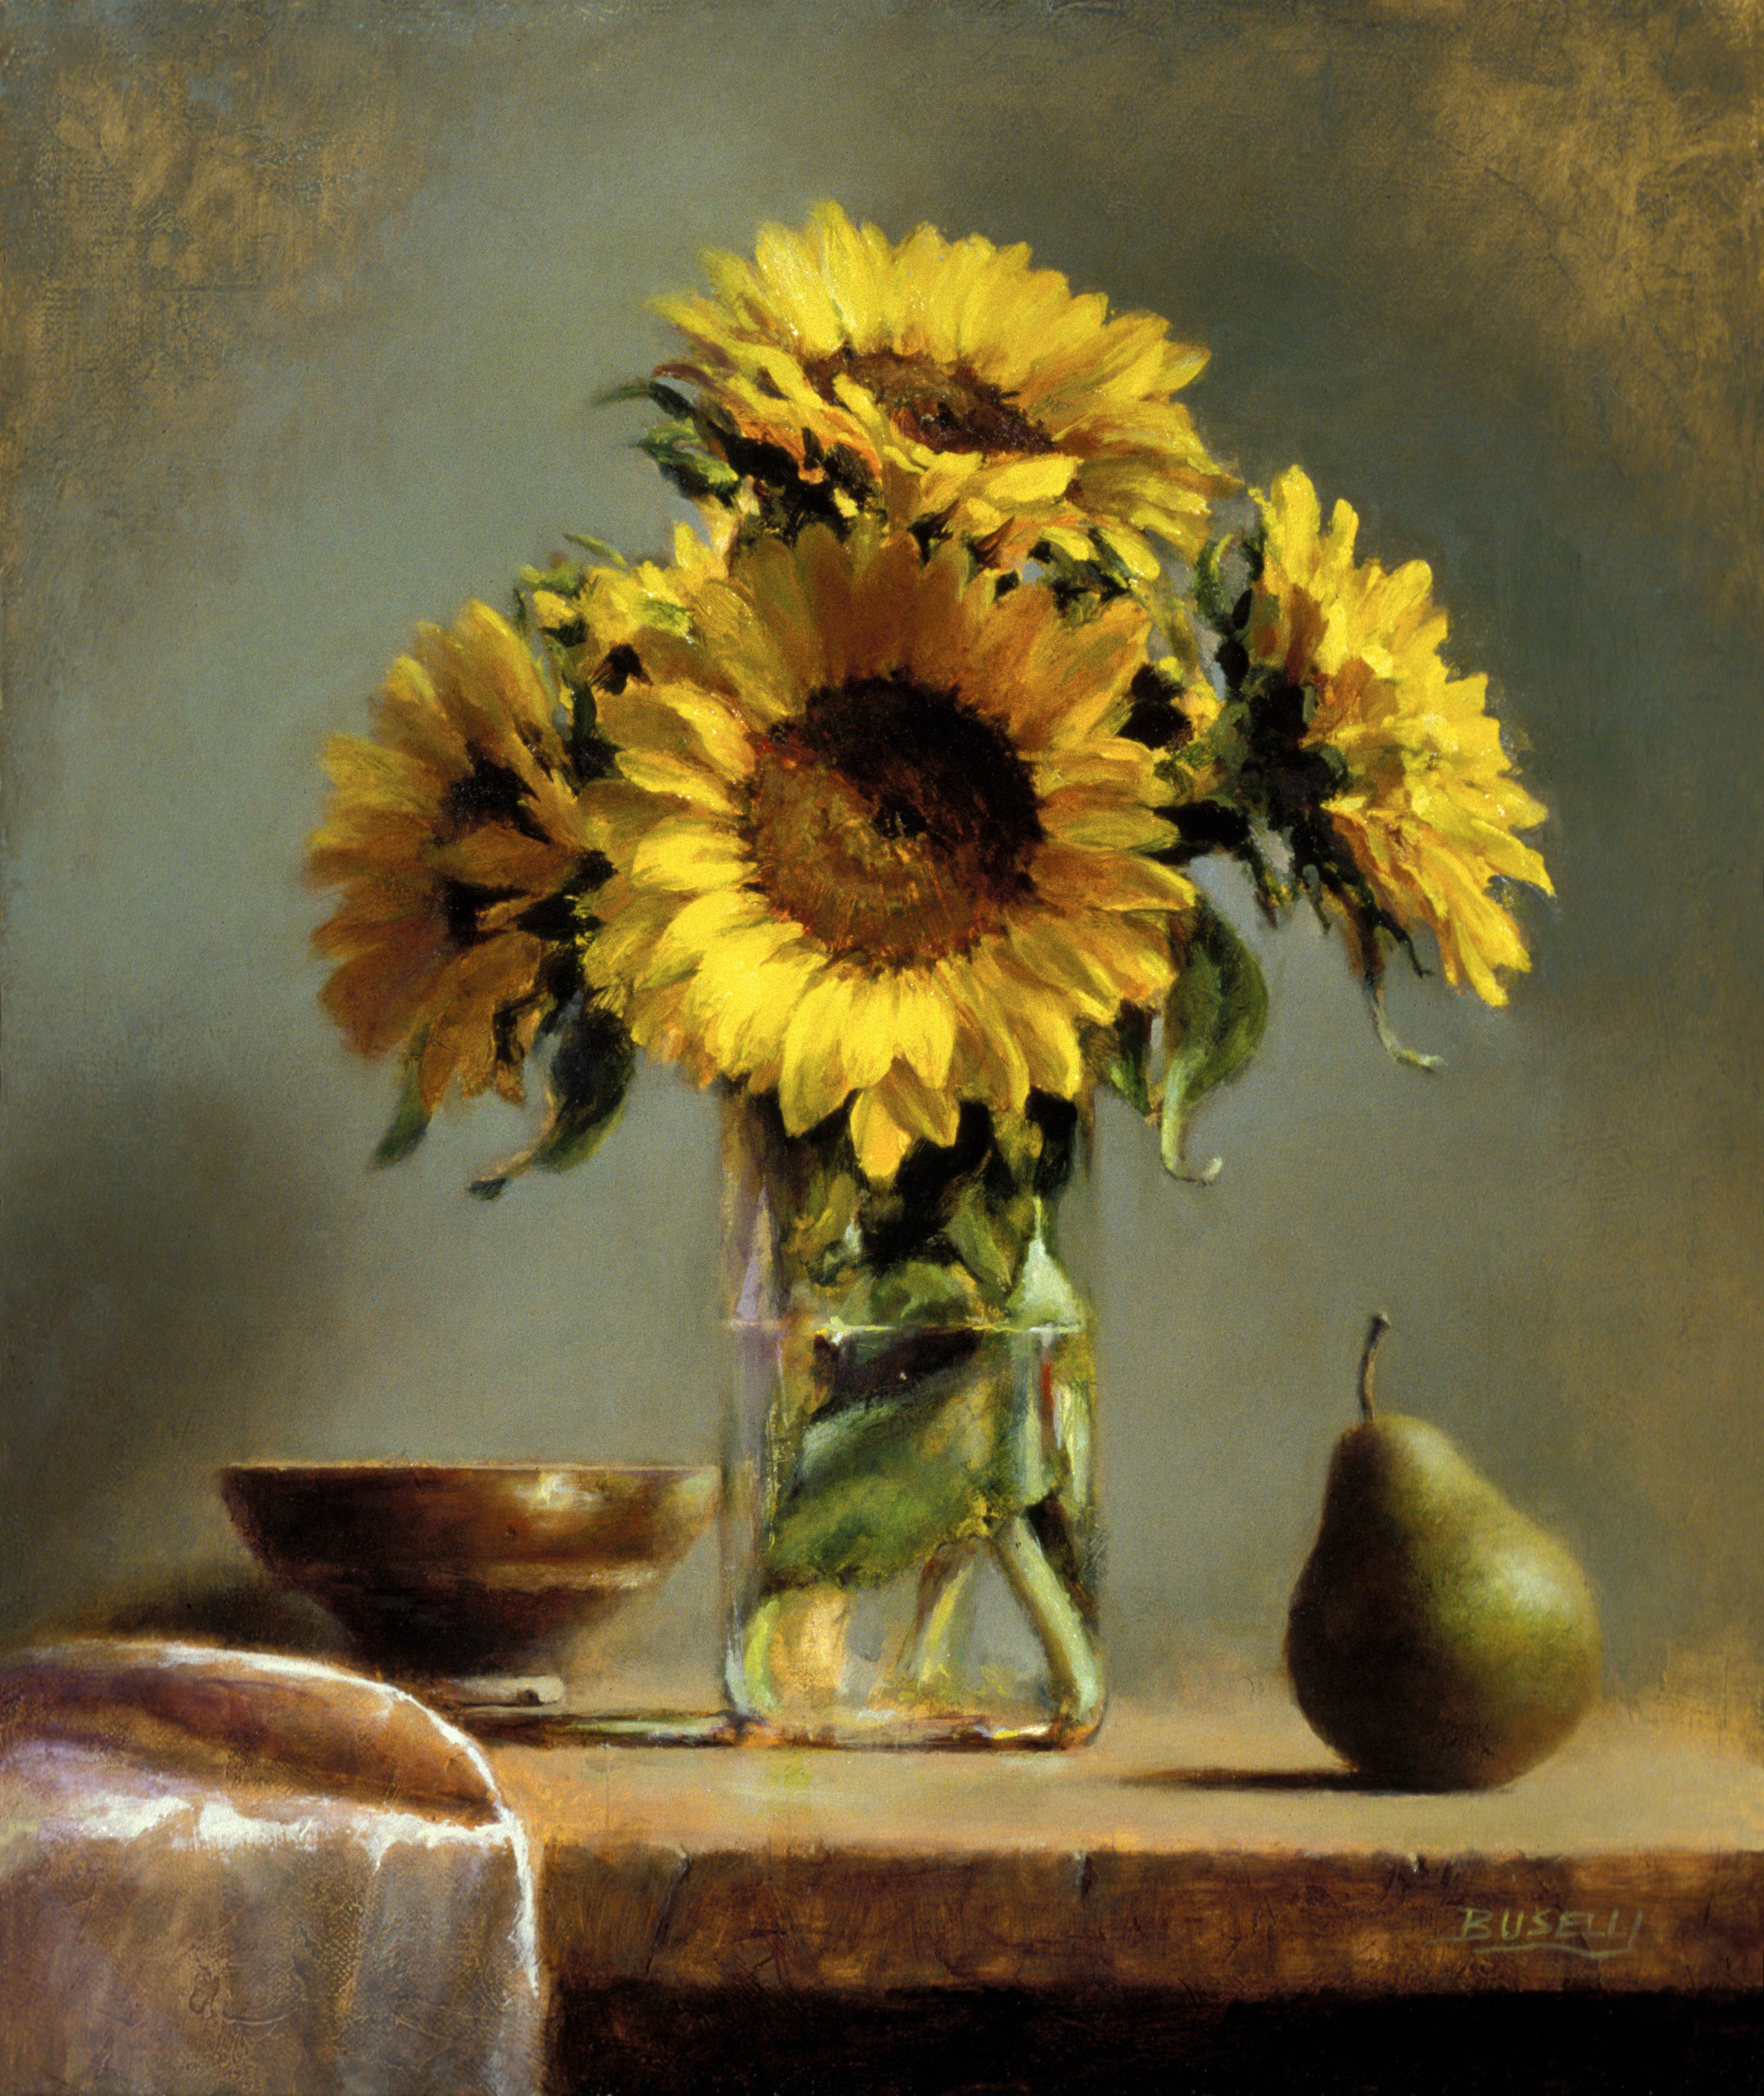 Oil on linen painting of sunflowers in a clear vase next to a pear on a wooden table.